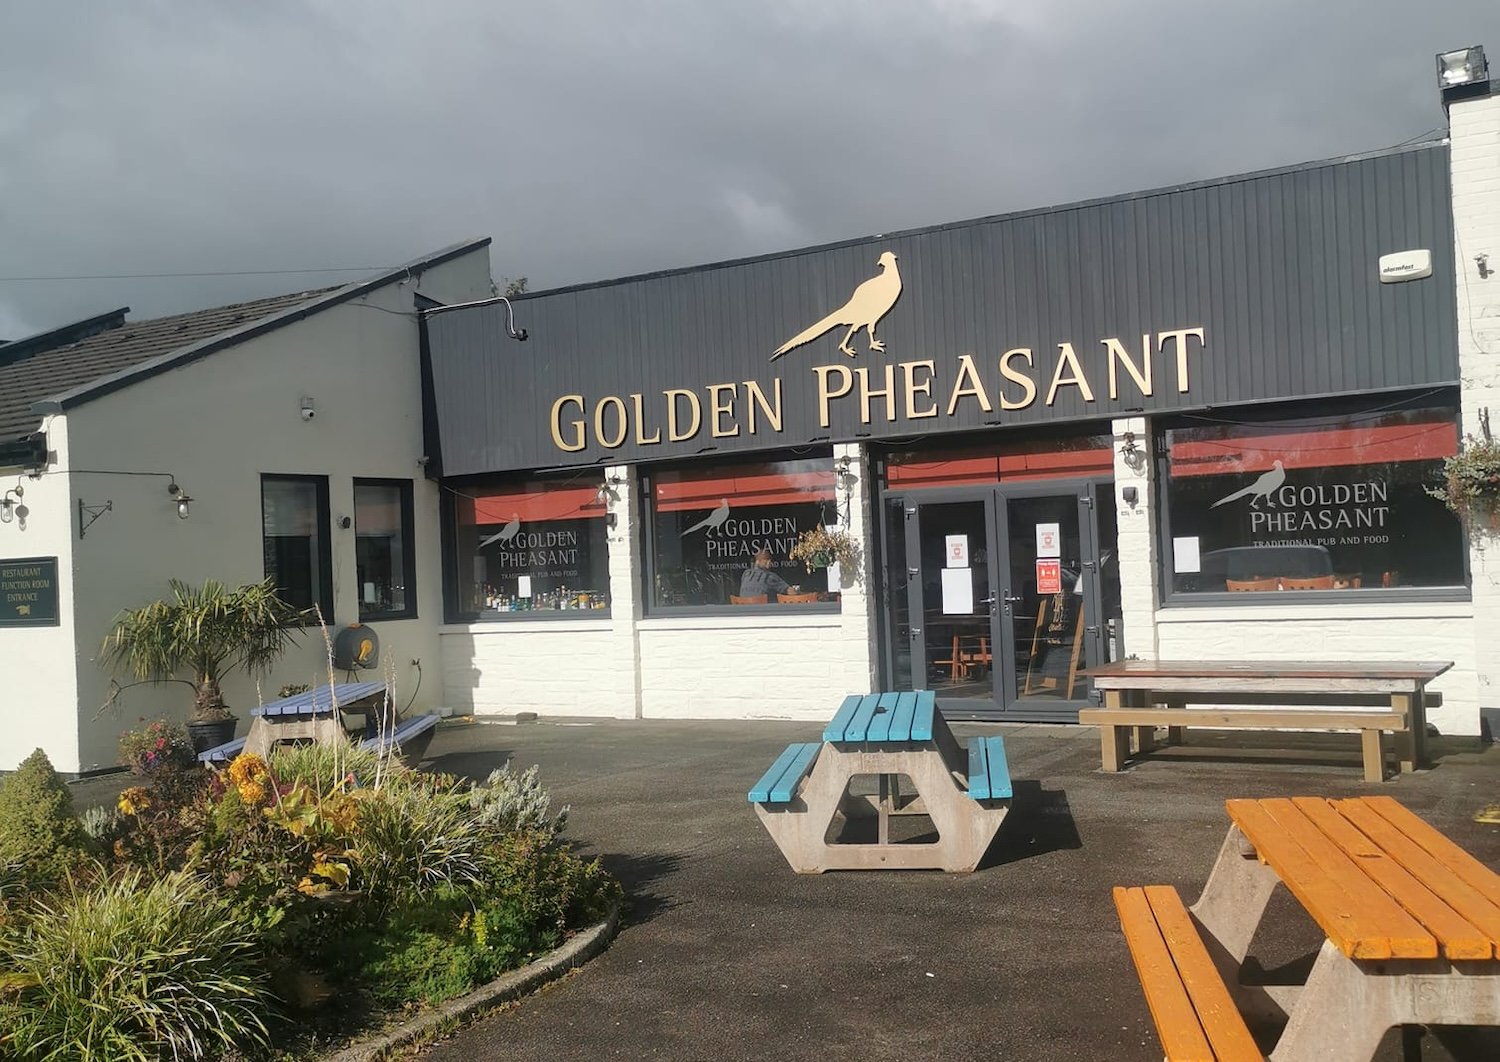 The Golden Pheasant - best Fish and Chips in Scotland  